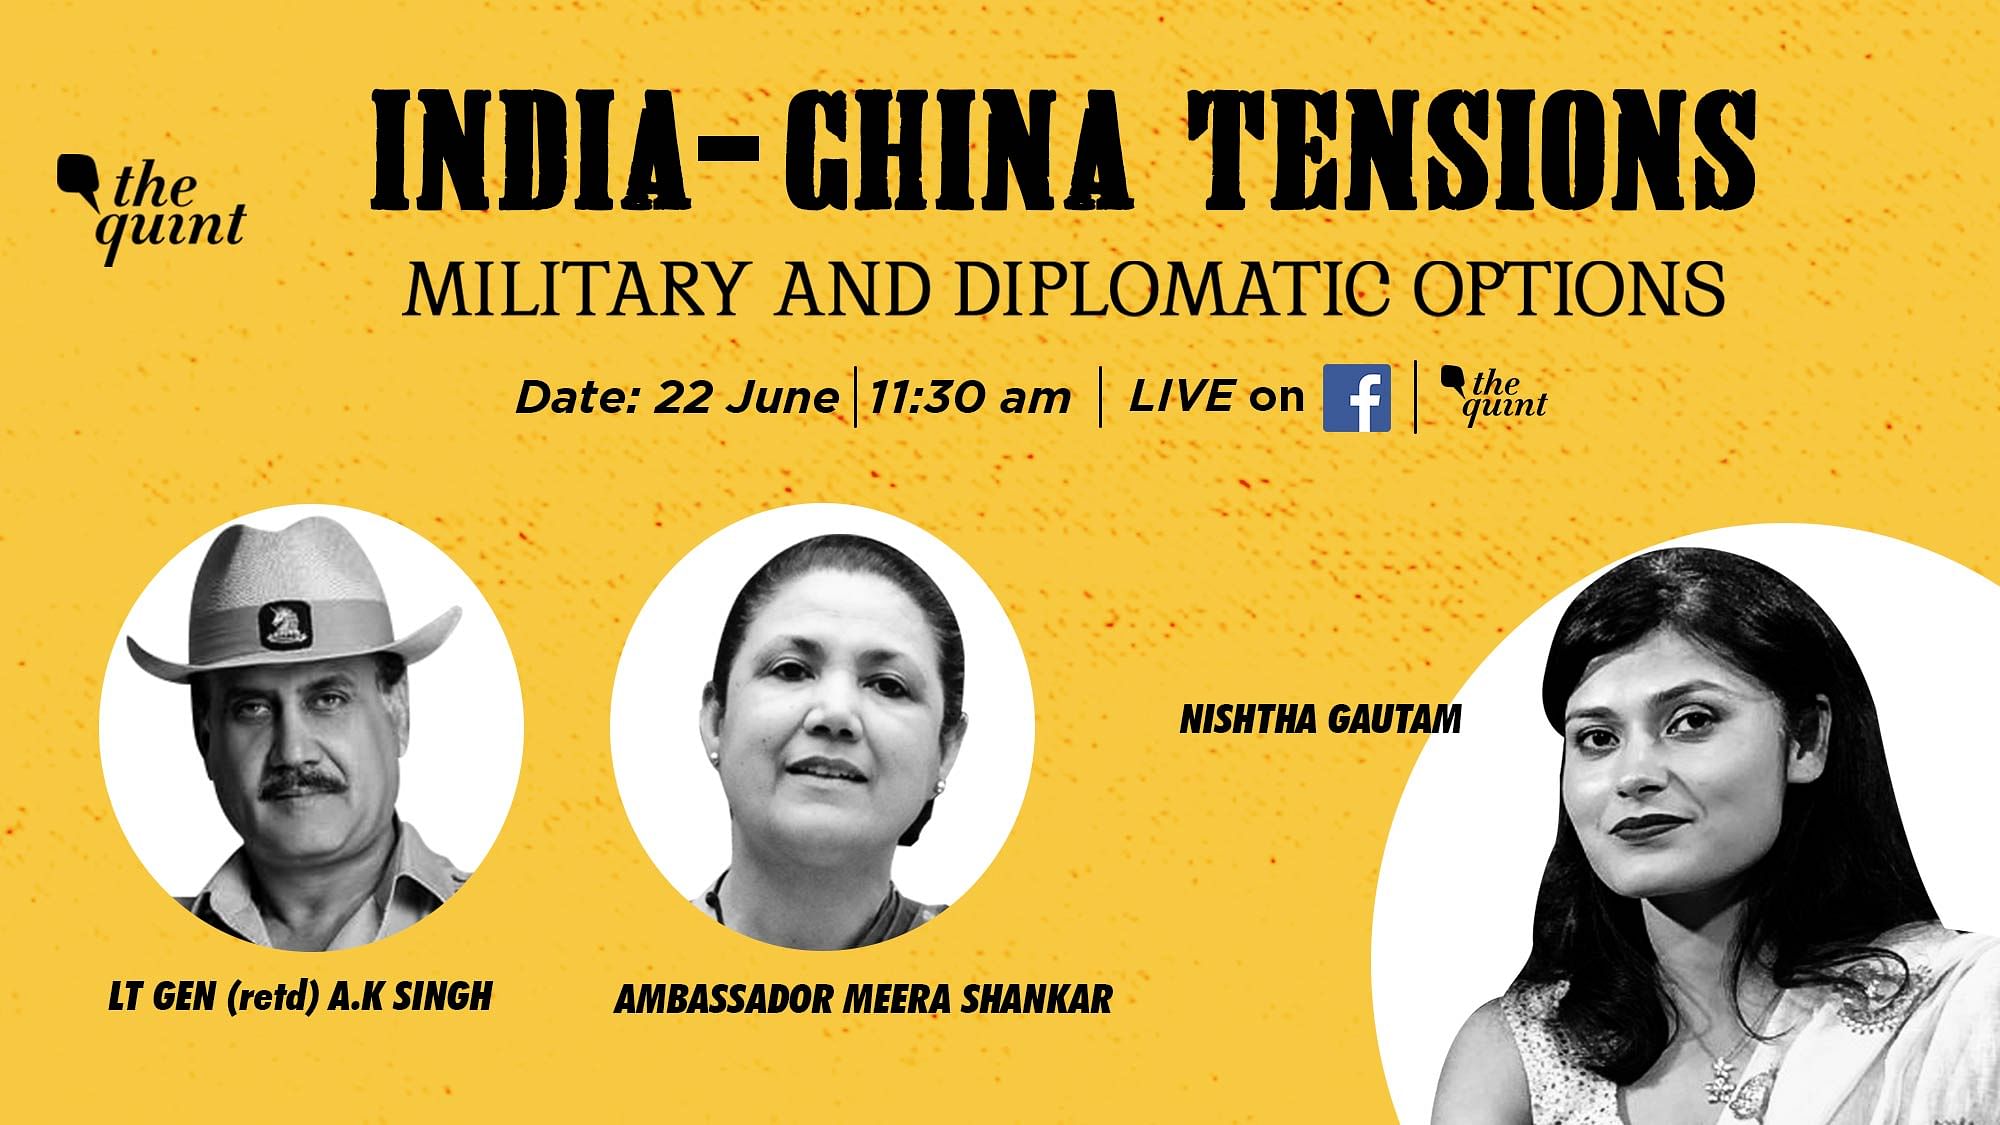 India-China Clash Before and After Galwan Violence: What Are India’s Military And Diplomatic Options Against China?